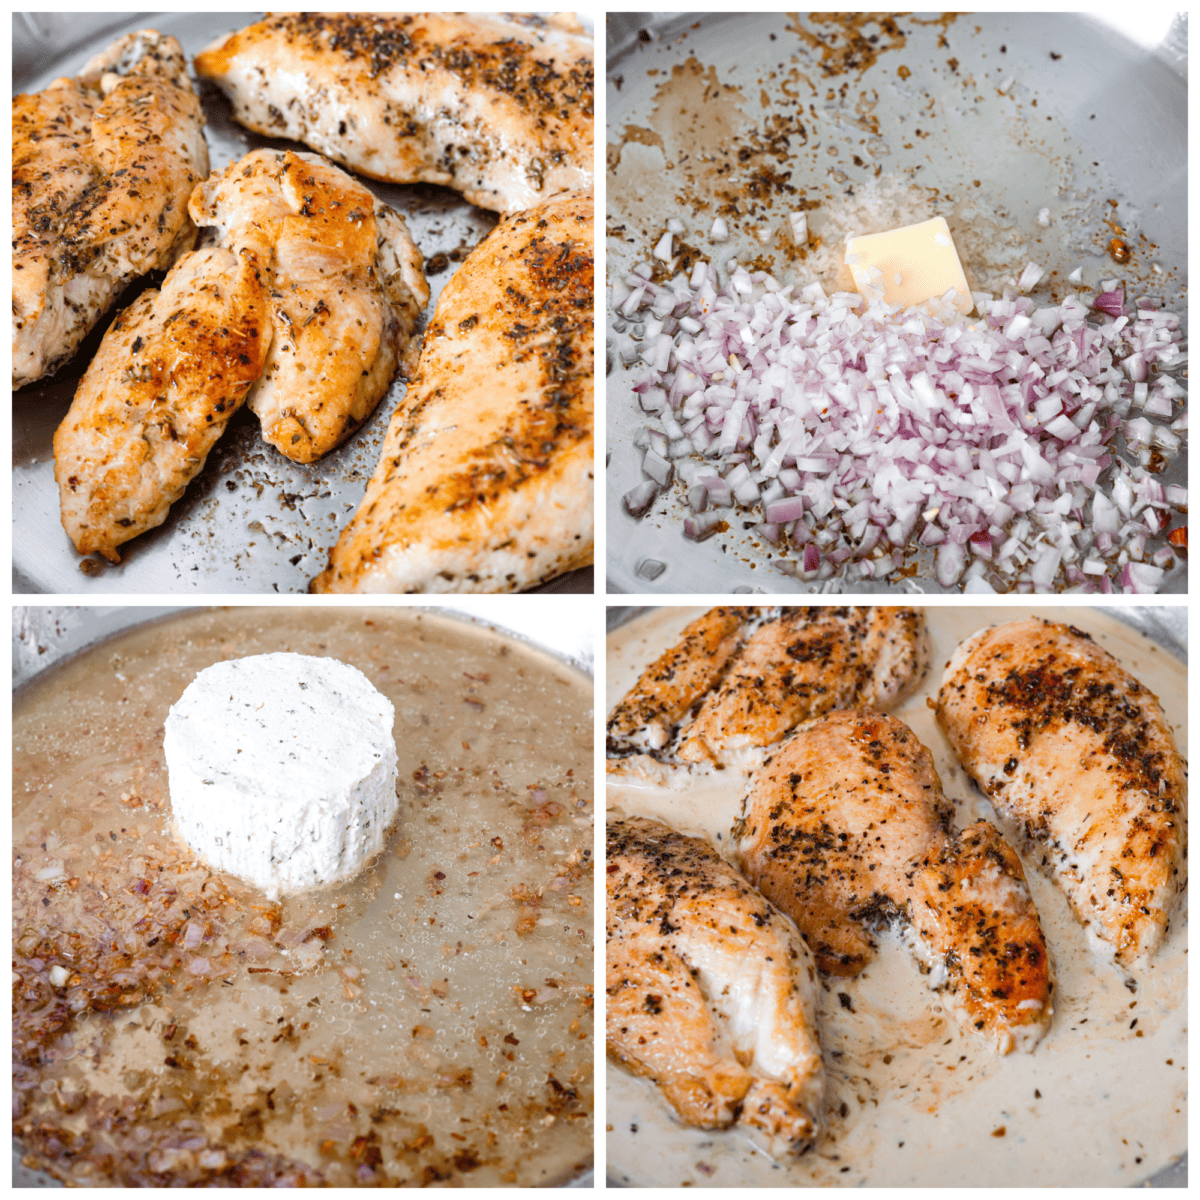 4-photo collage of the chicken being seared, the onions being sauteed, and the boursin sauce ingredients being combined.